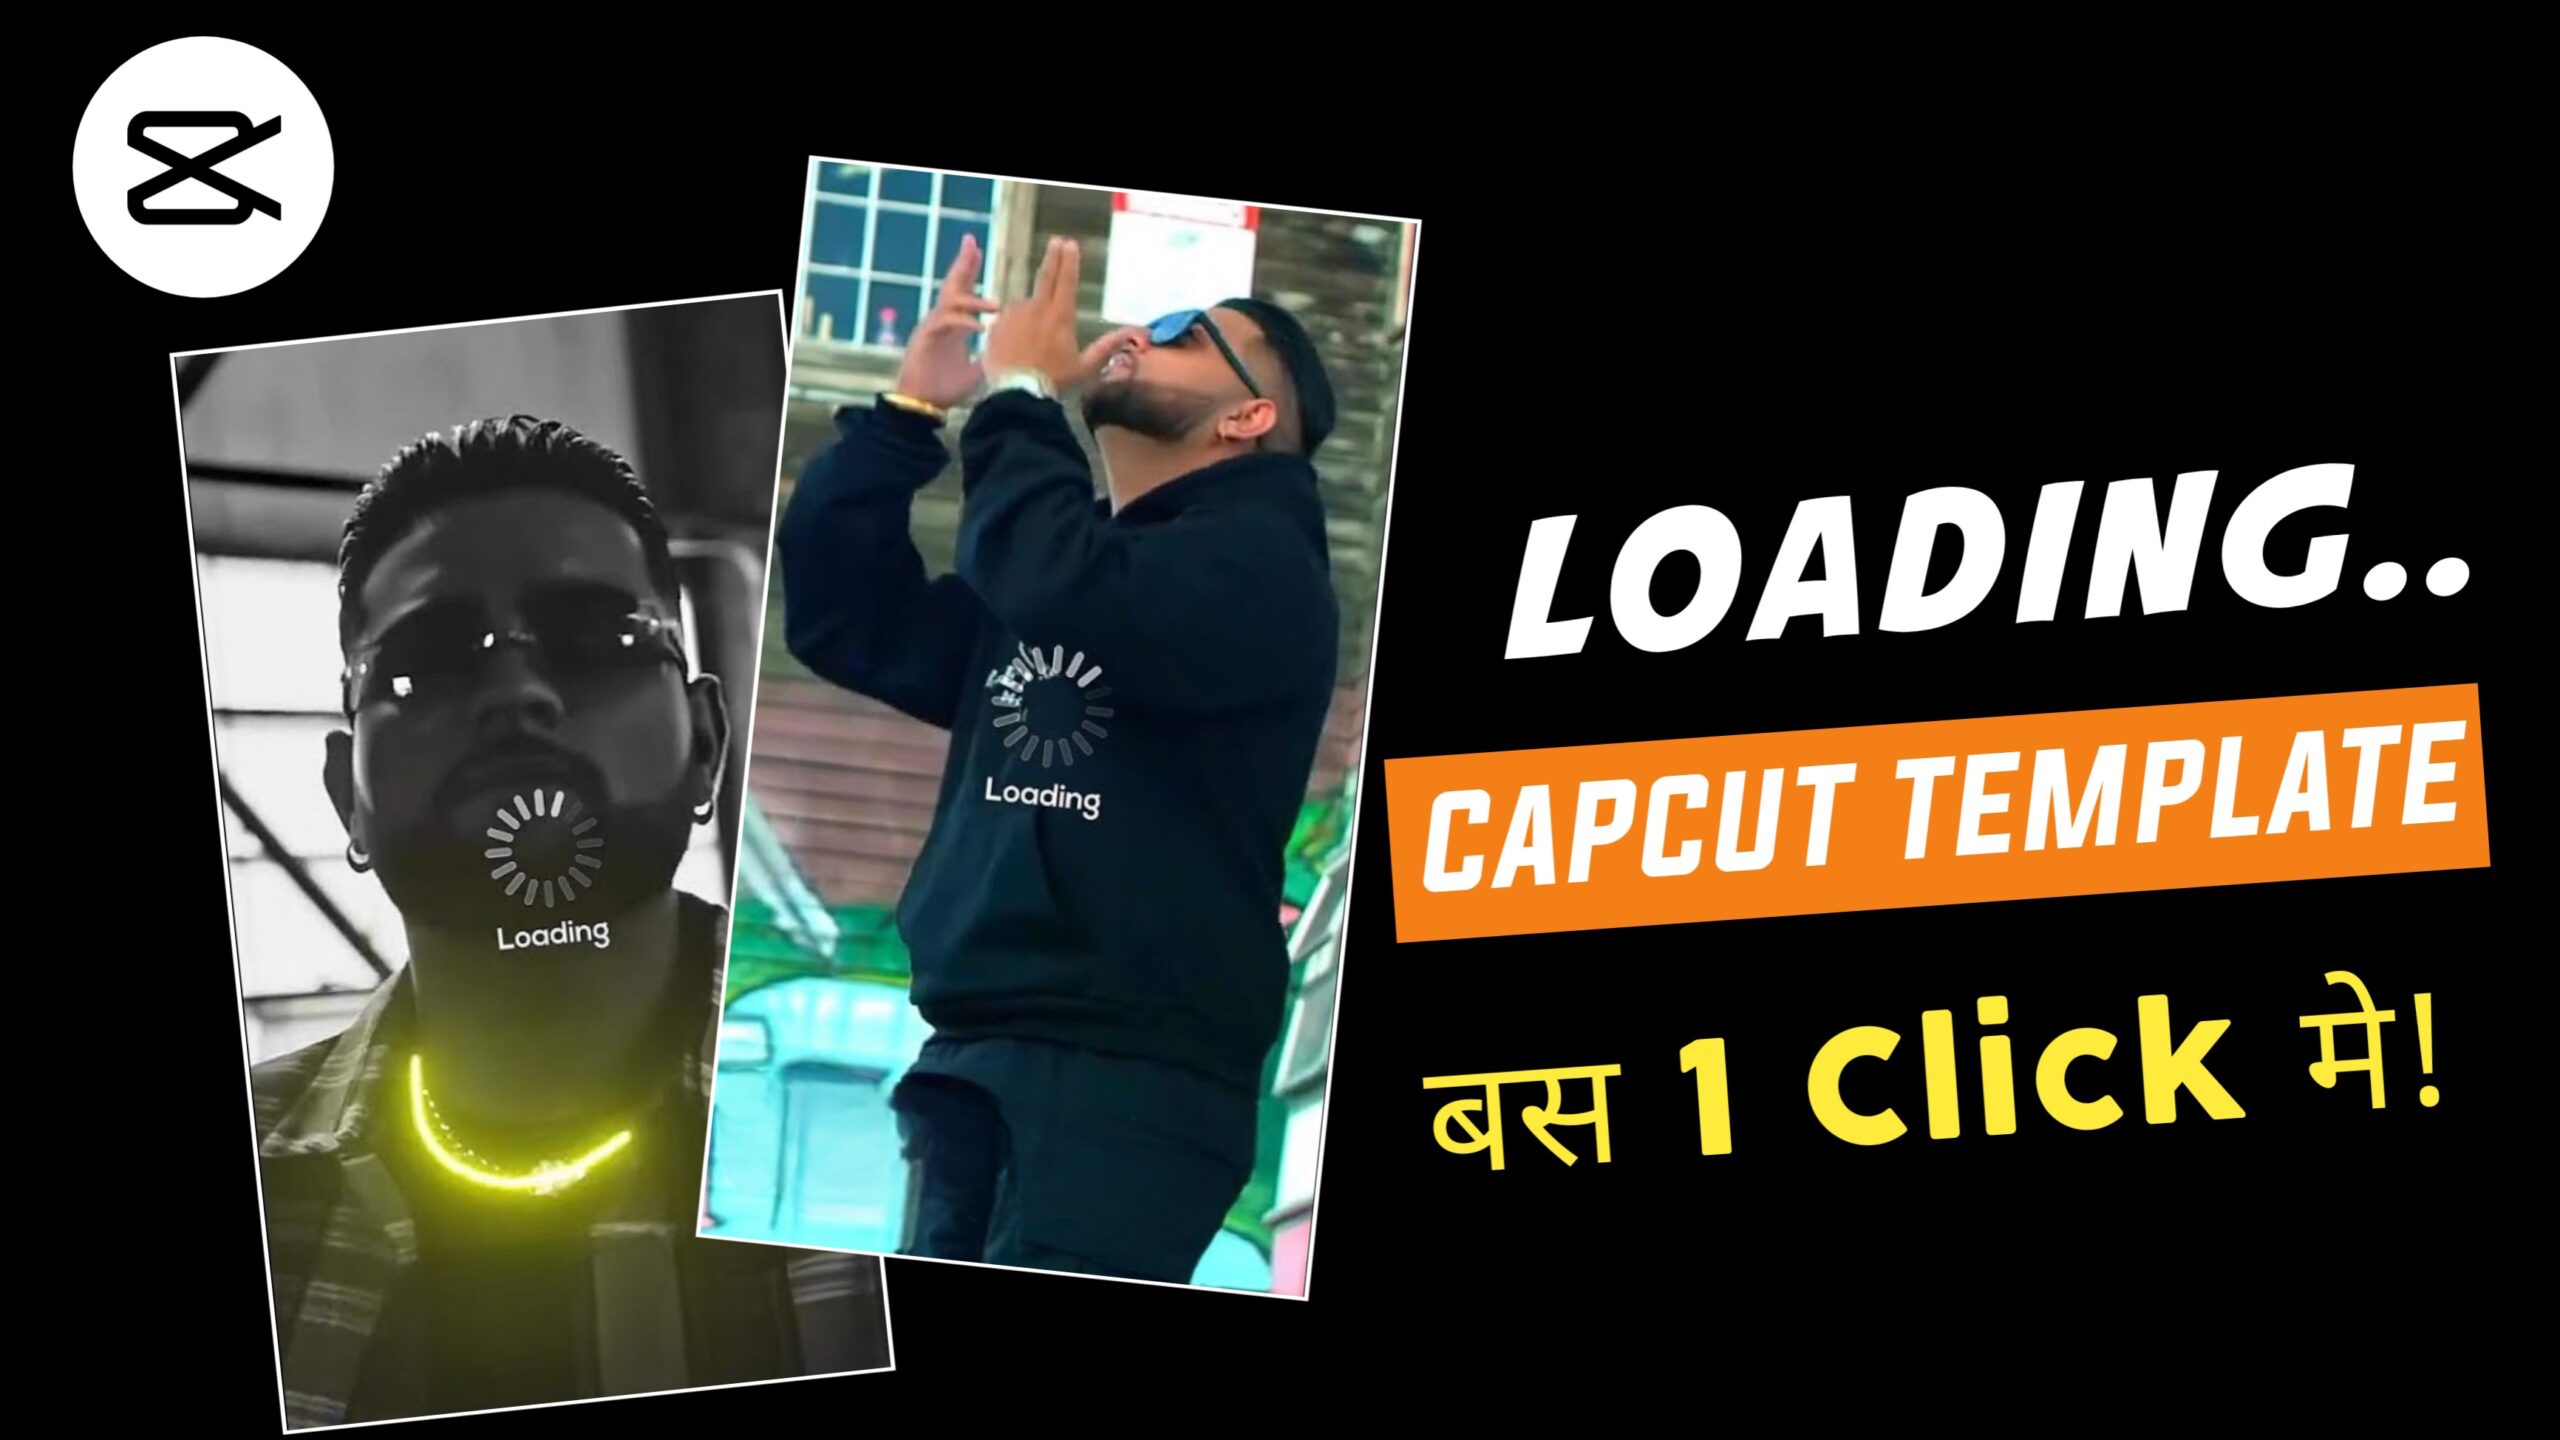 Loading capcut template link 2023 100% Working Link 2023 Alight